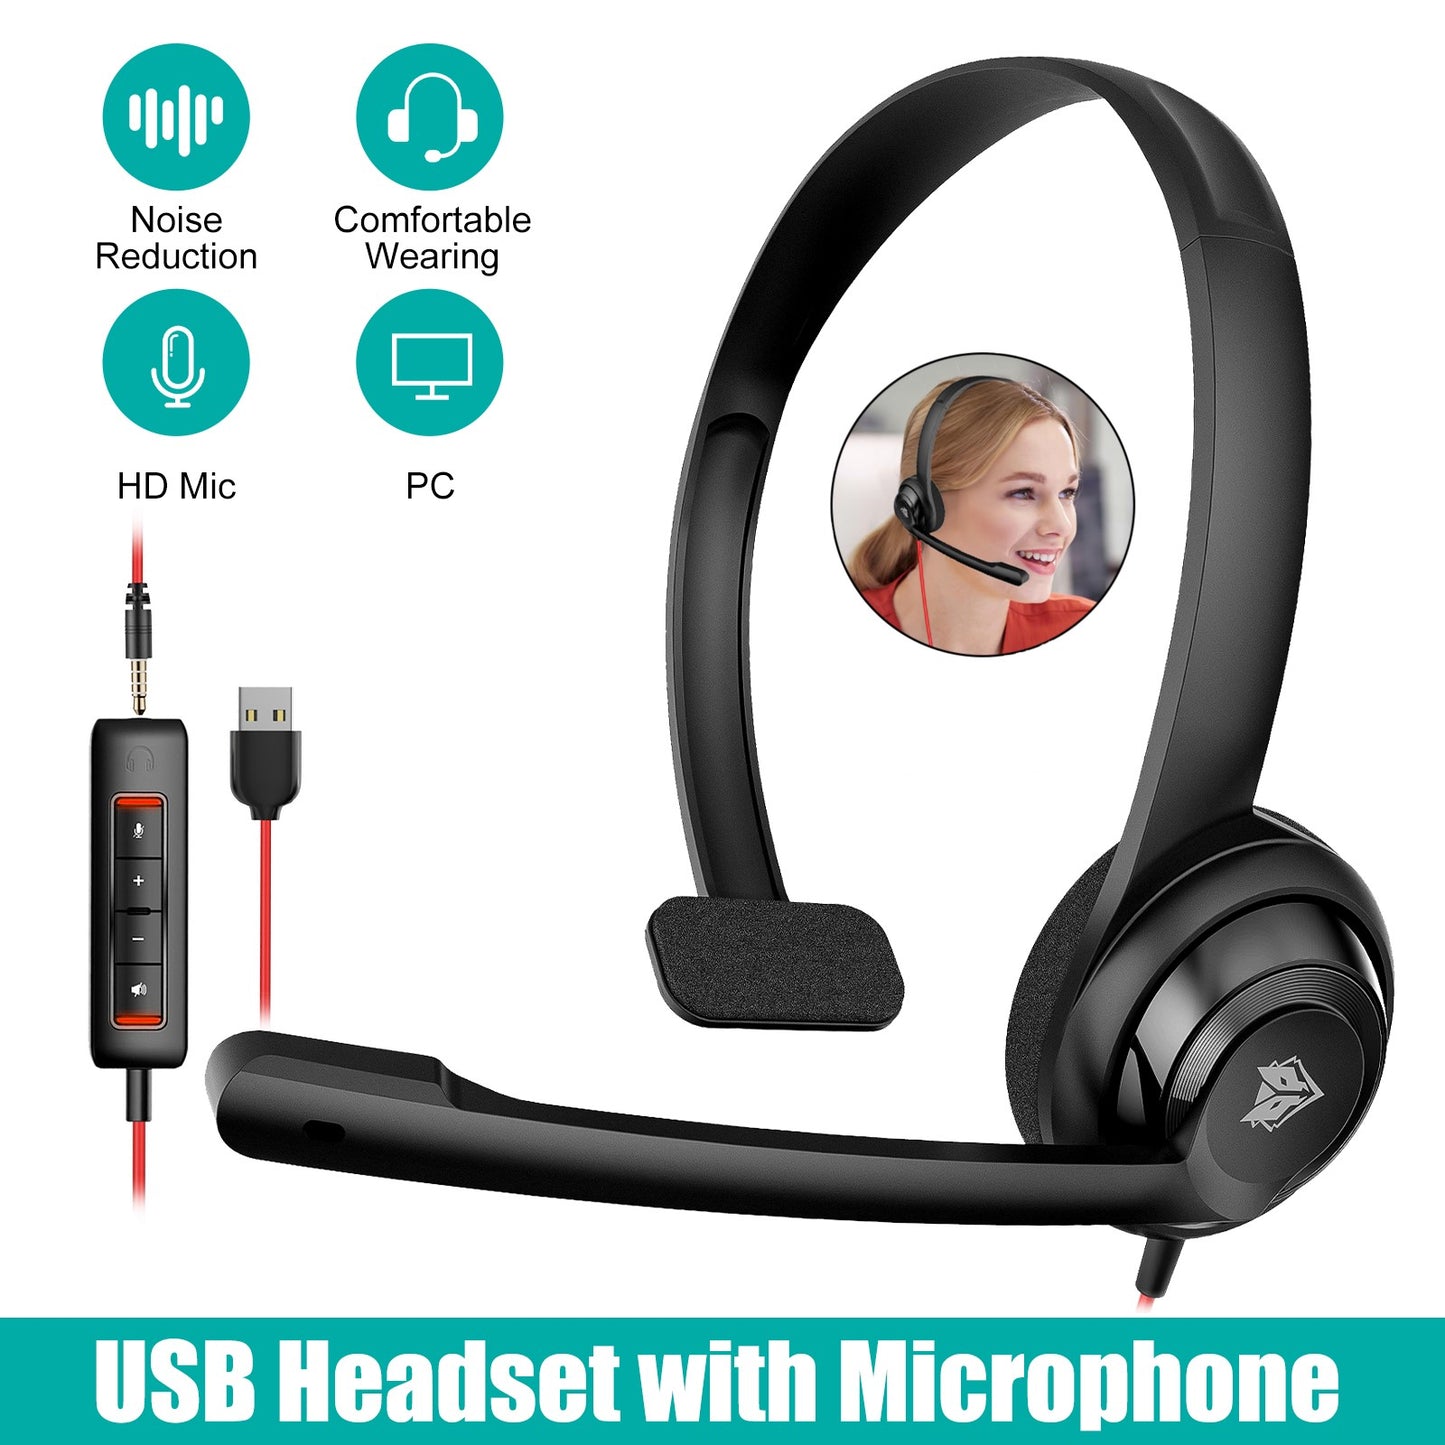 USB C/3.5mm Jack Wired Single sided Headphones - Plug and Play Wired Headphones with in-Line Volume Control 3.5mm Jack for Laptop, Mac, Computer